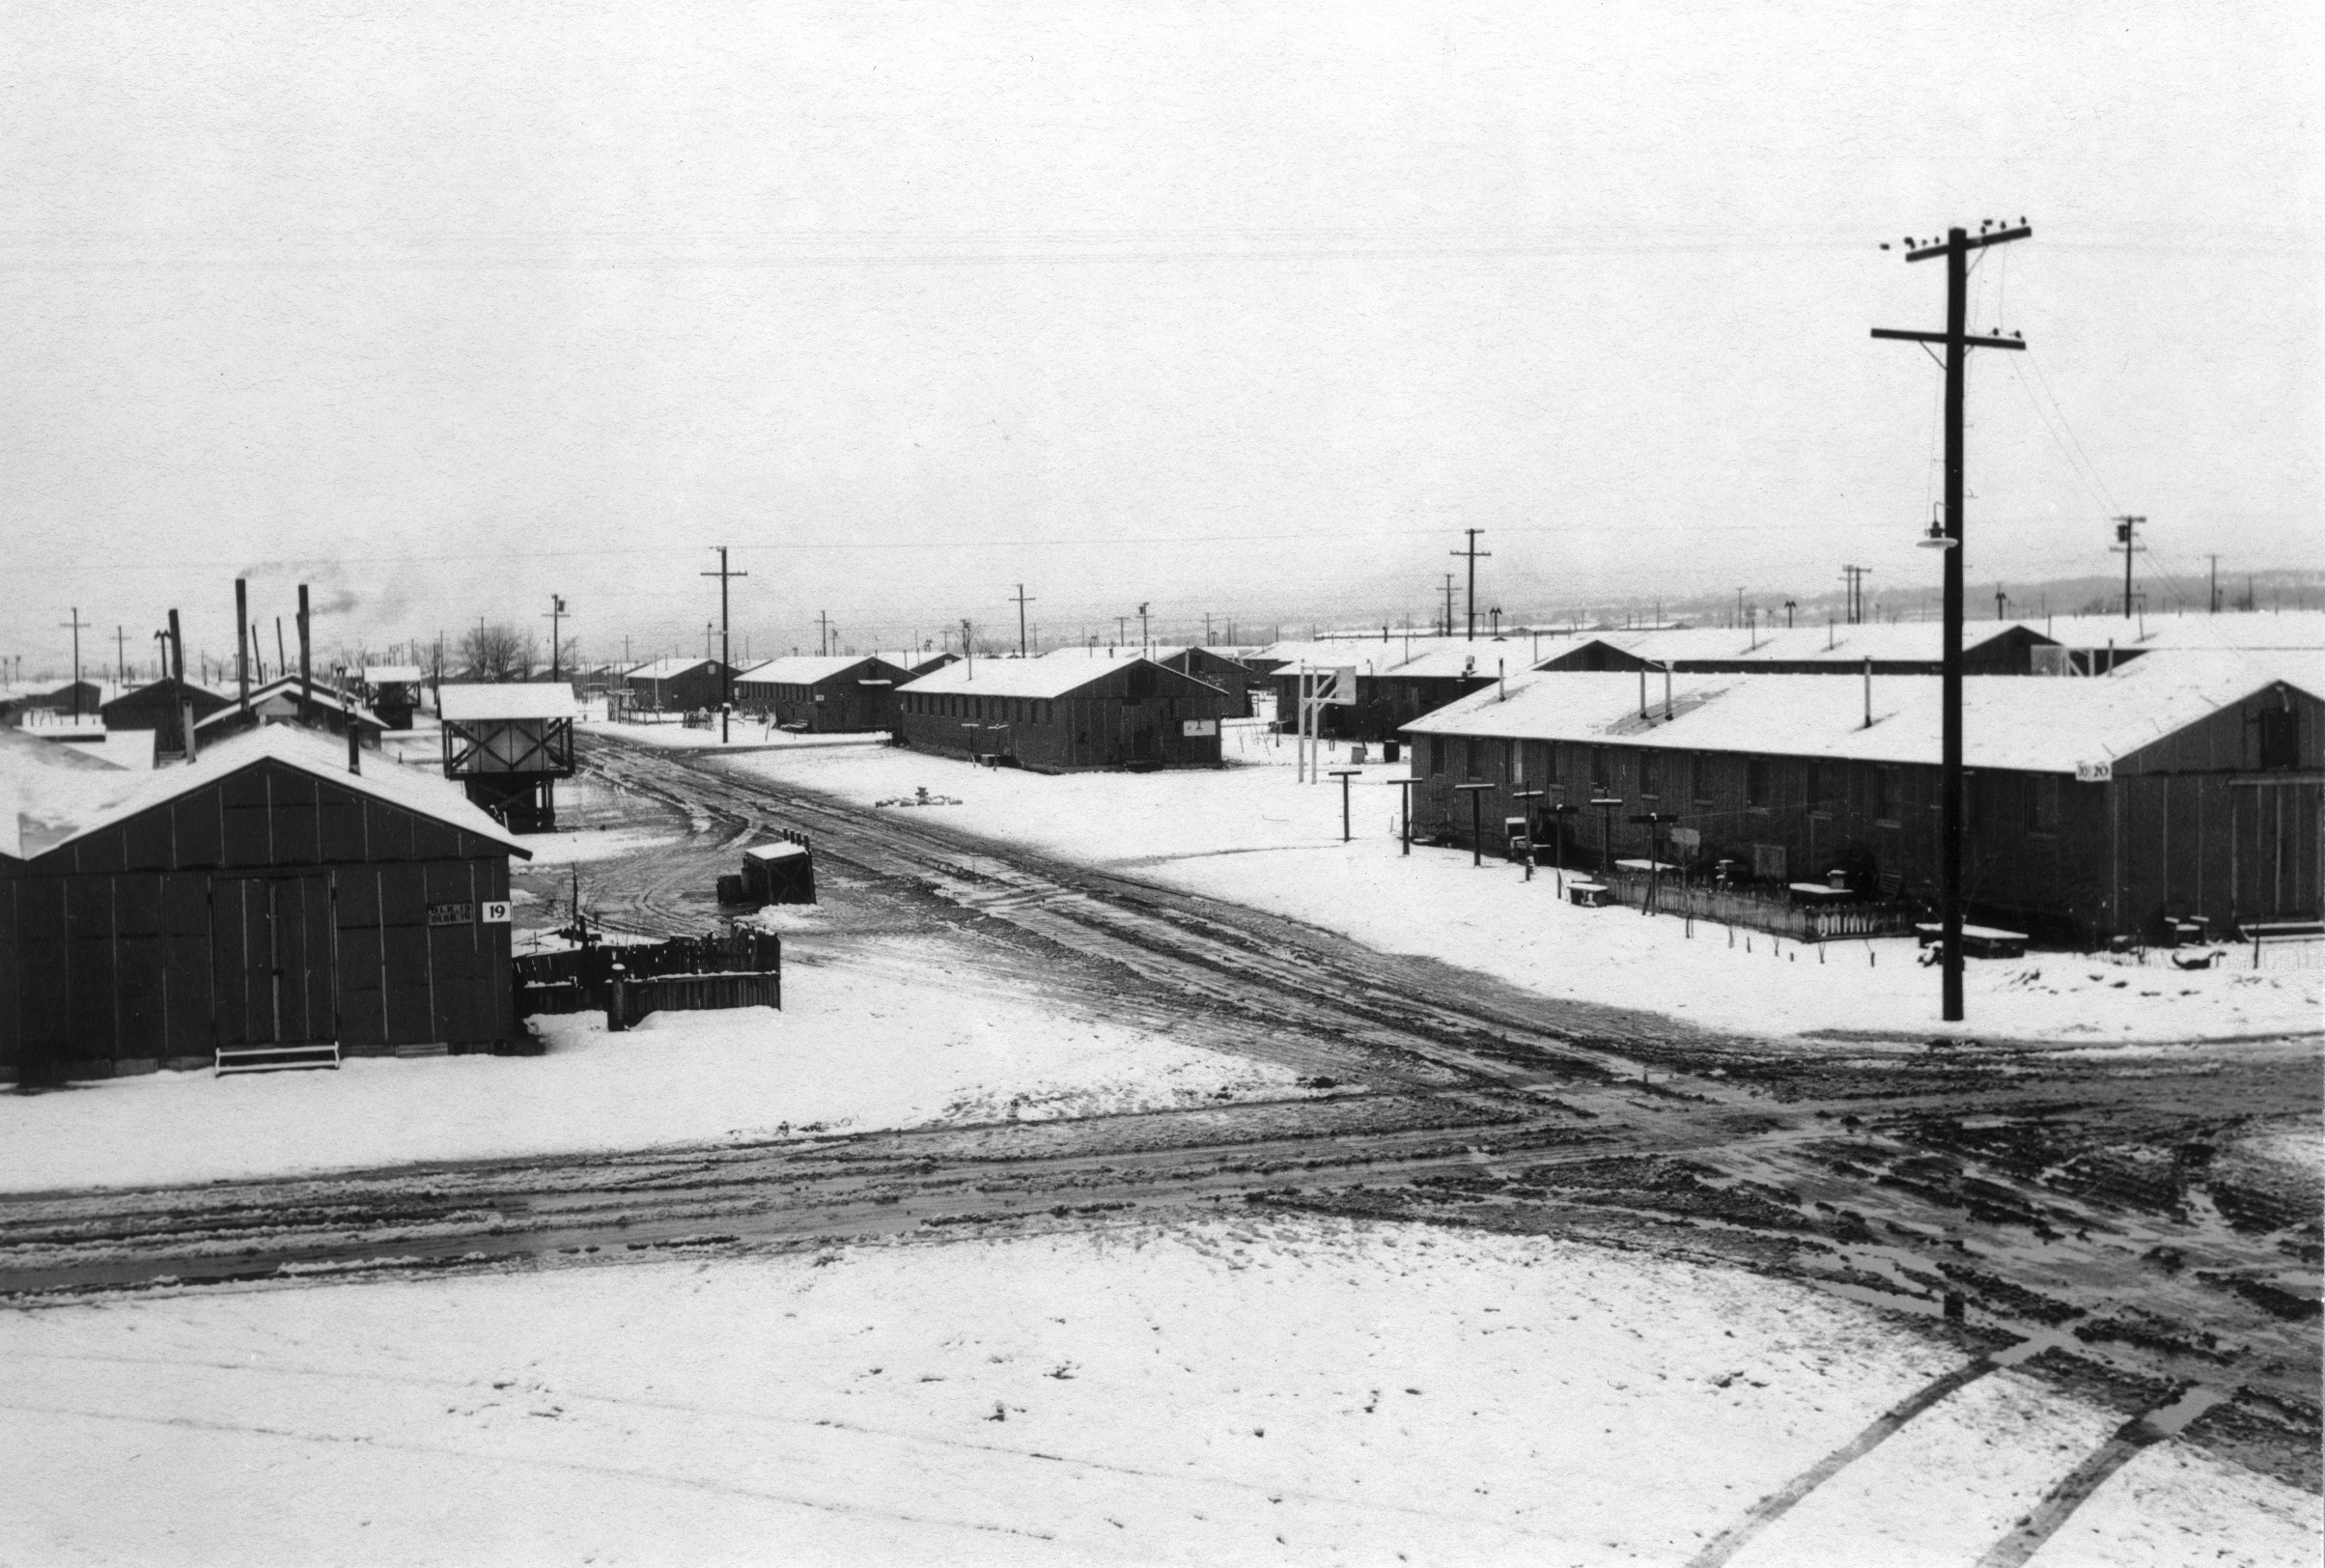 Snow covered barracks at the Manzanar Relocation Center for deported Japanese-Americans, Inyo County, California, United States, 1943.